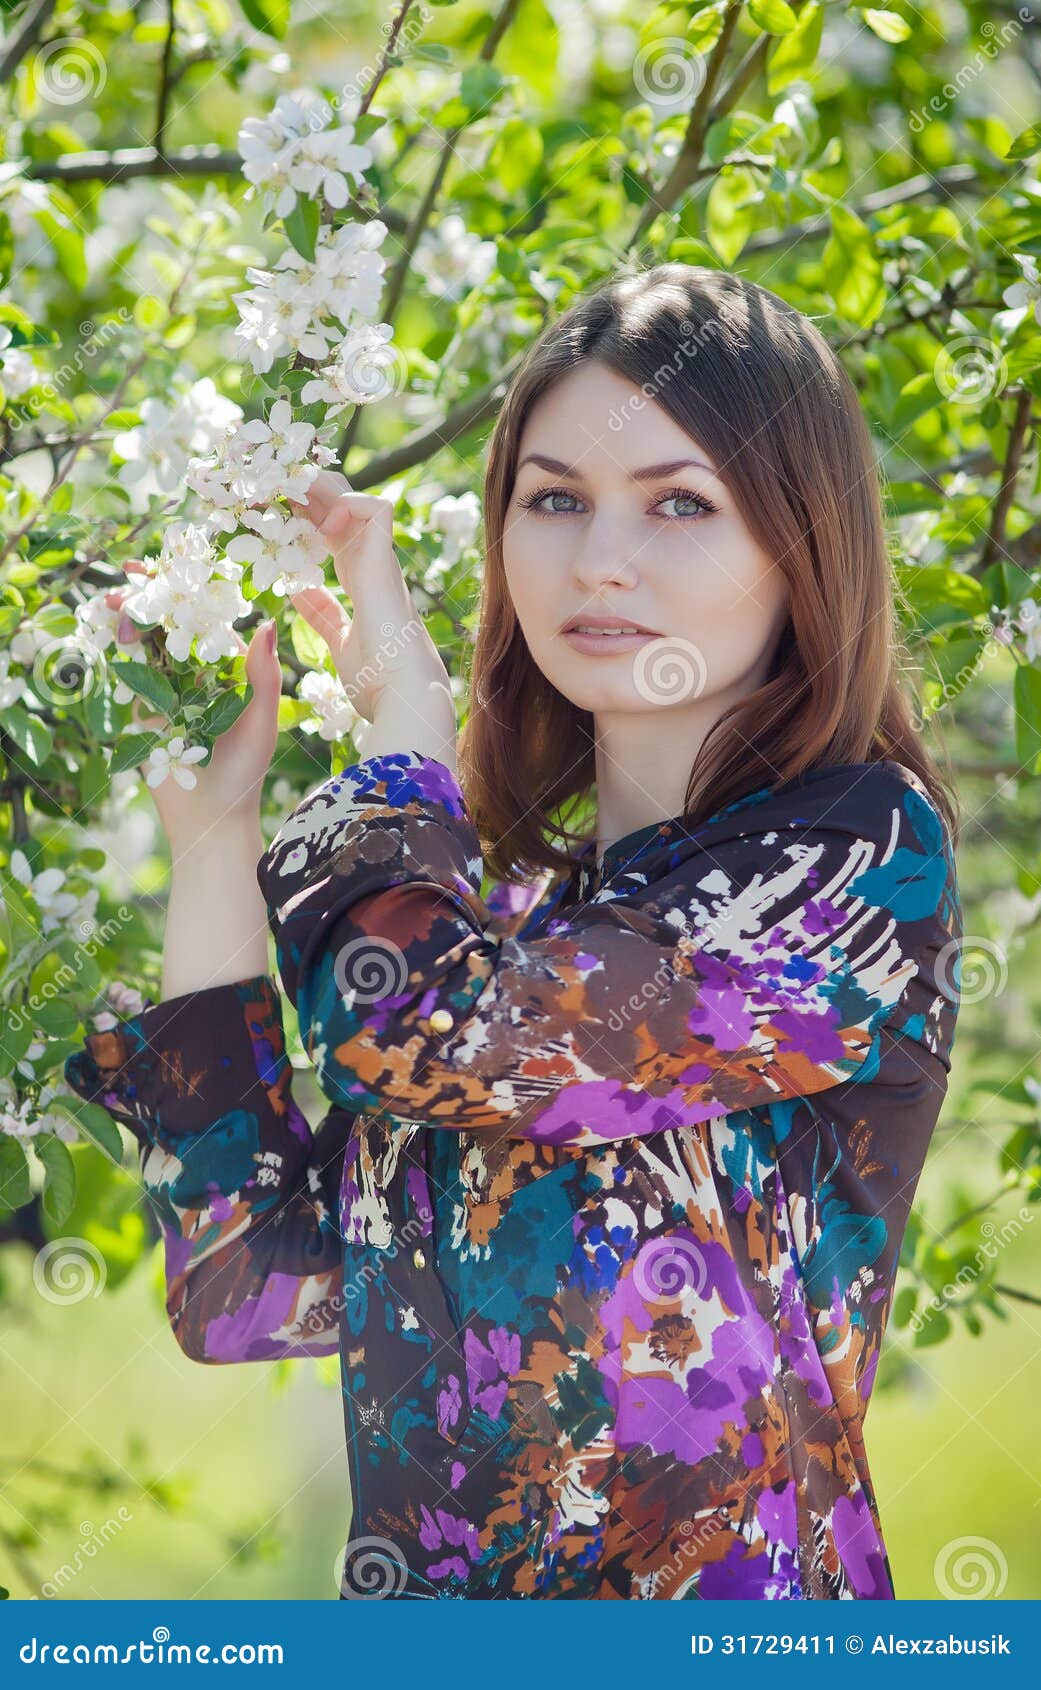 Girl Posing Under Apple-tree Stock Image - Image of leisure, blossoming ...